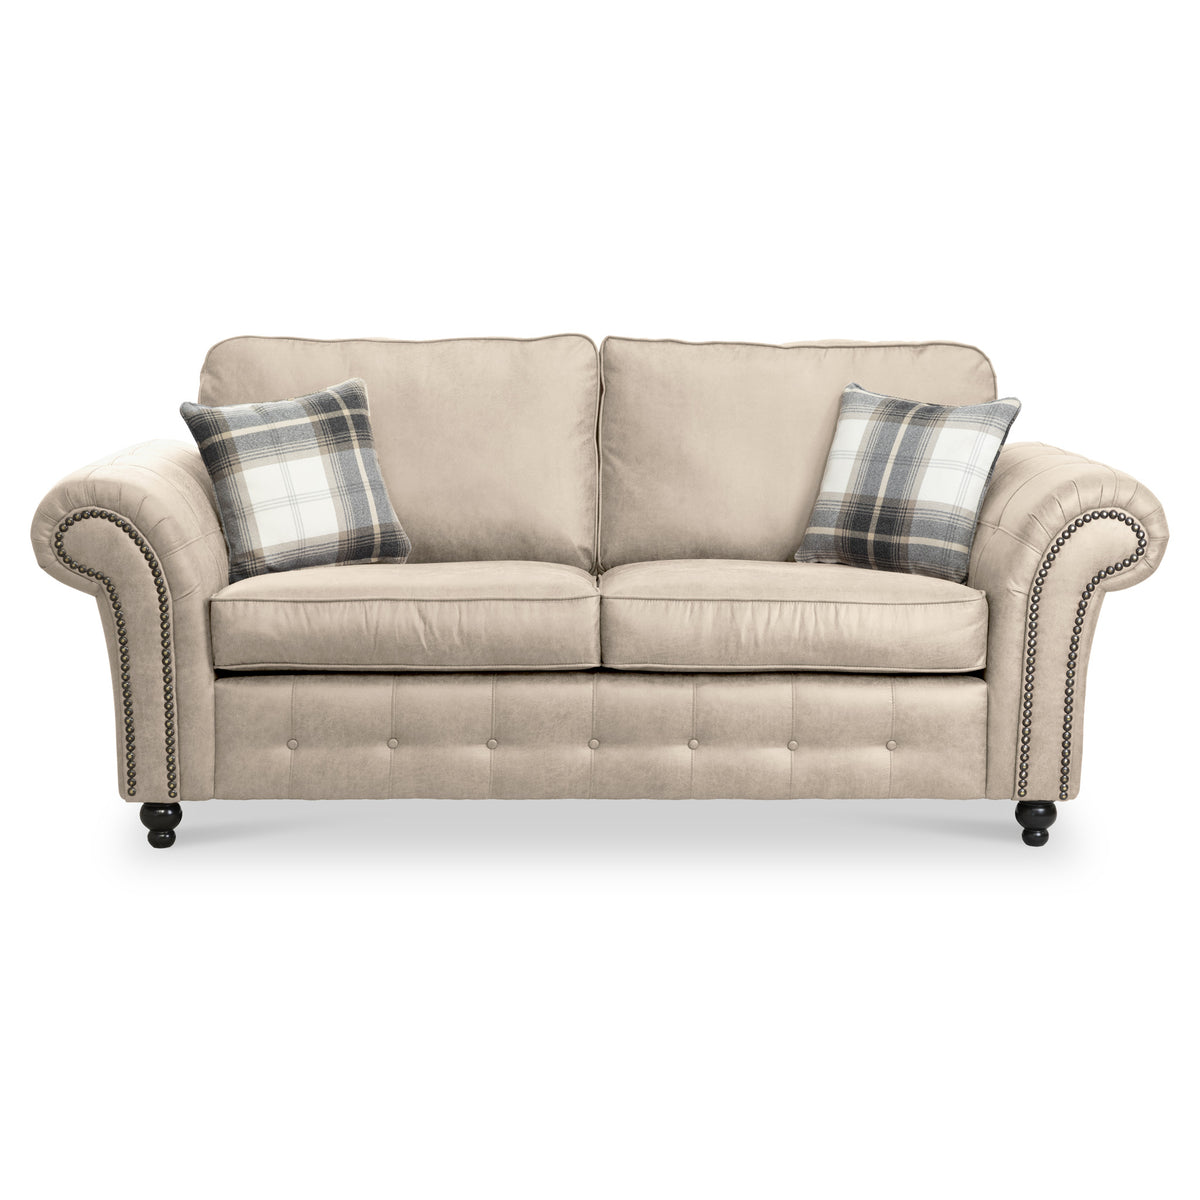 Edward Marble Faux Leather 3 Seater Couch